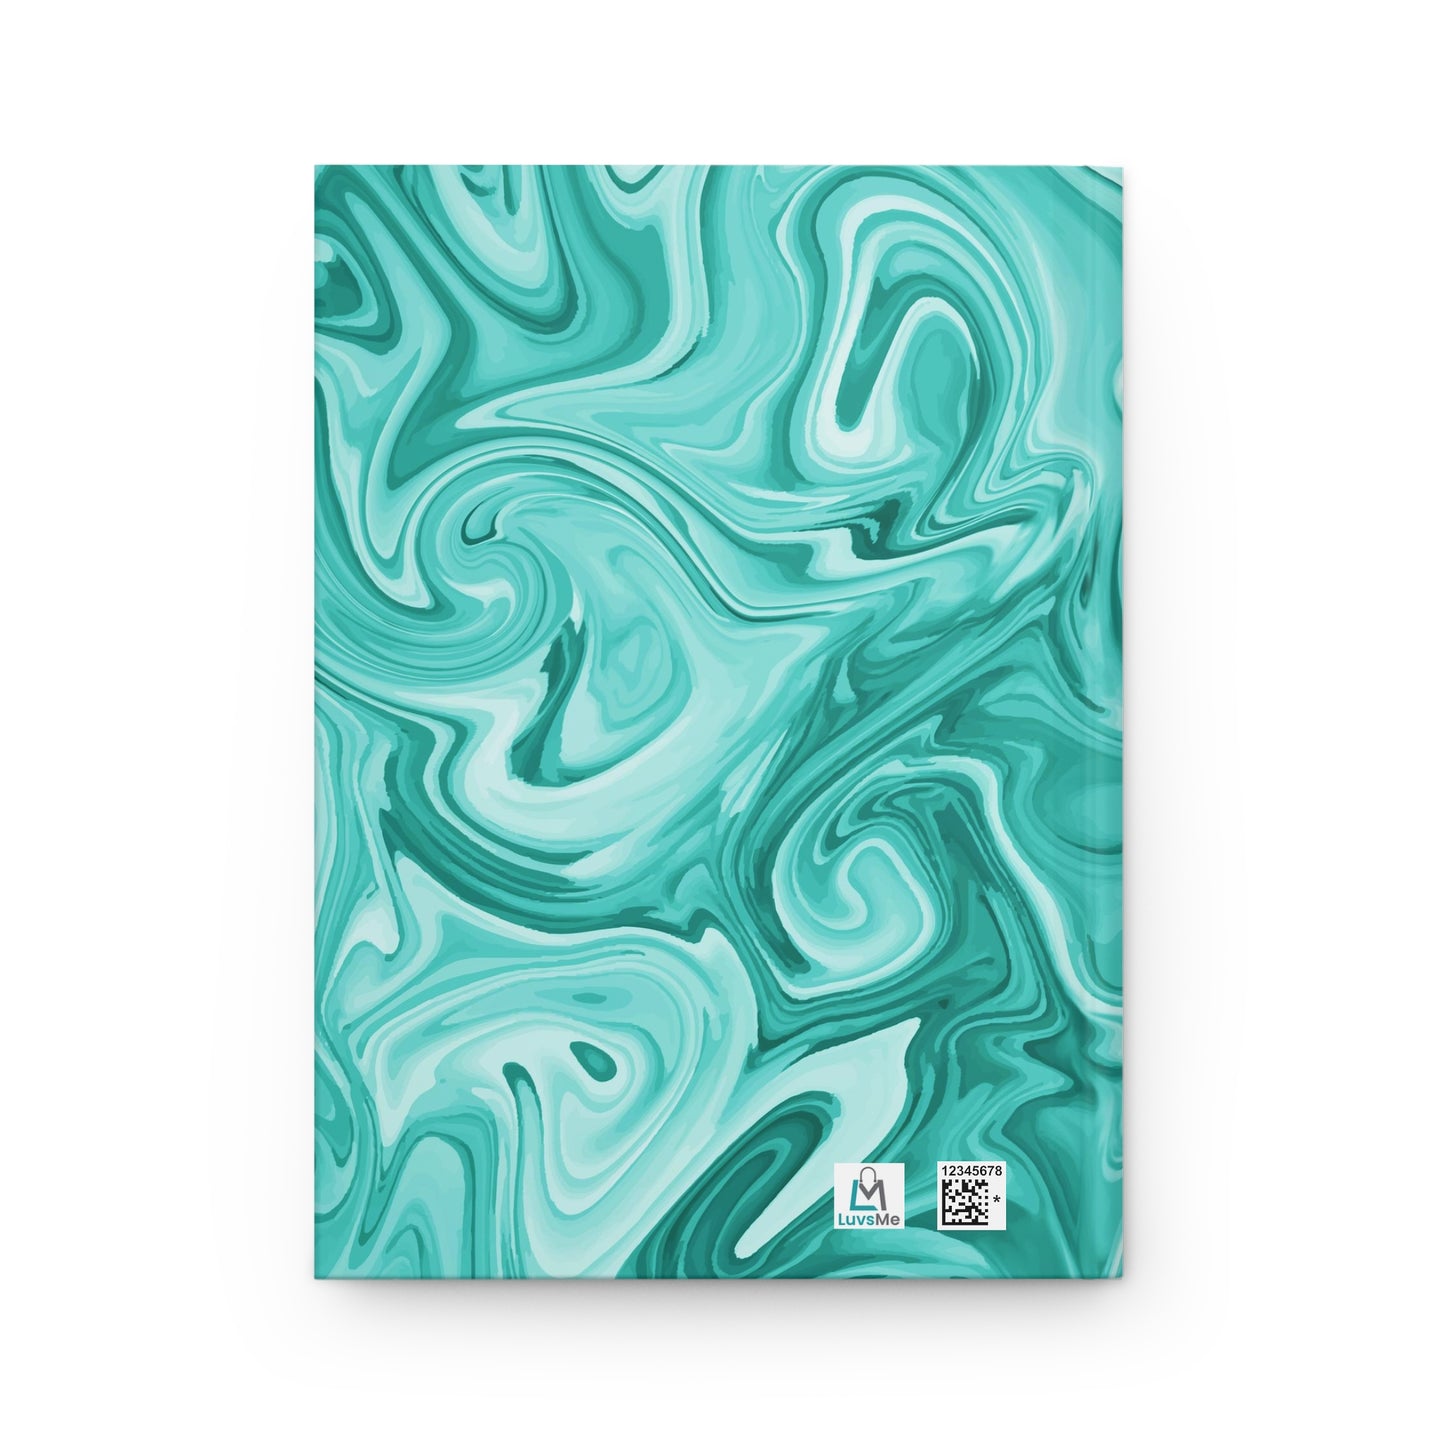 Be REAL Not Perfect - Teal Green Marble - Hardcover Lined Journal Matte